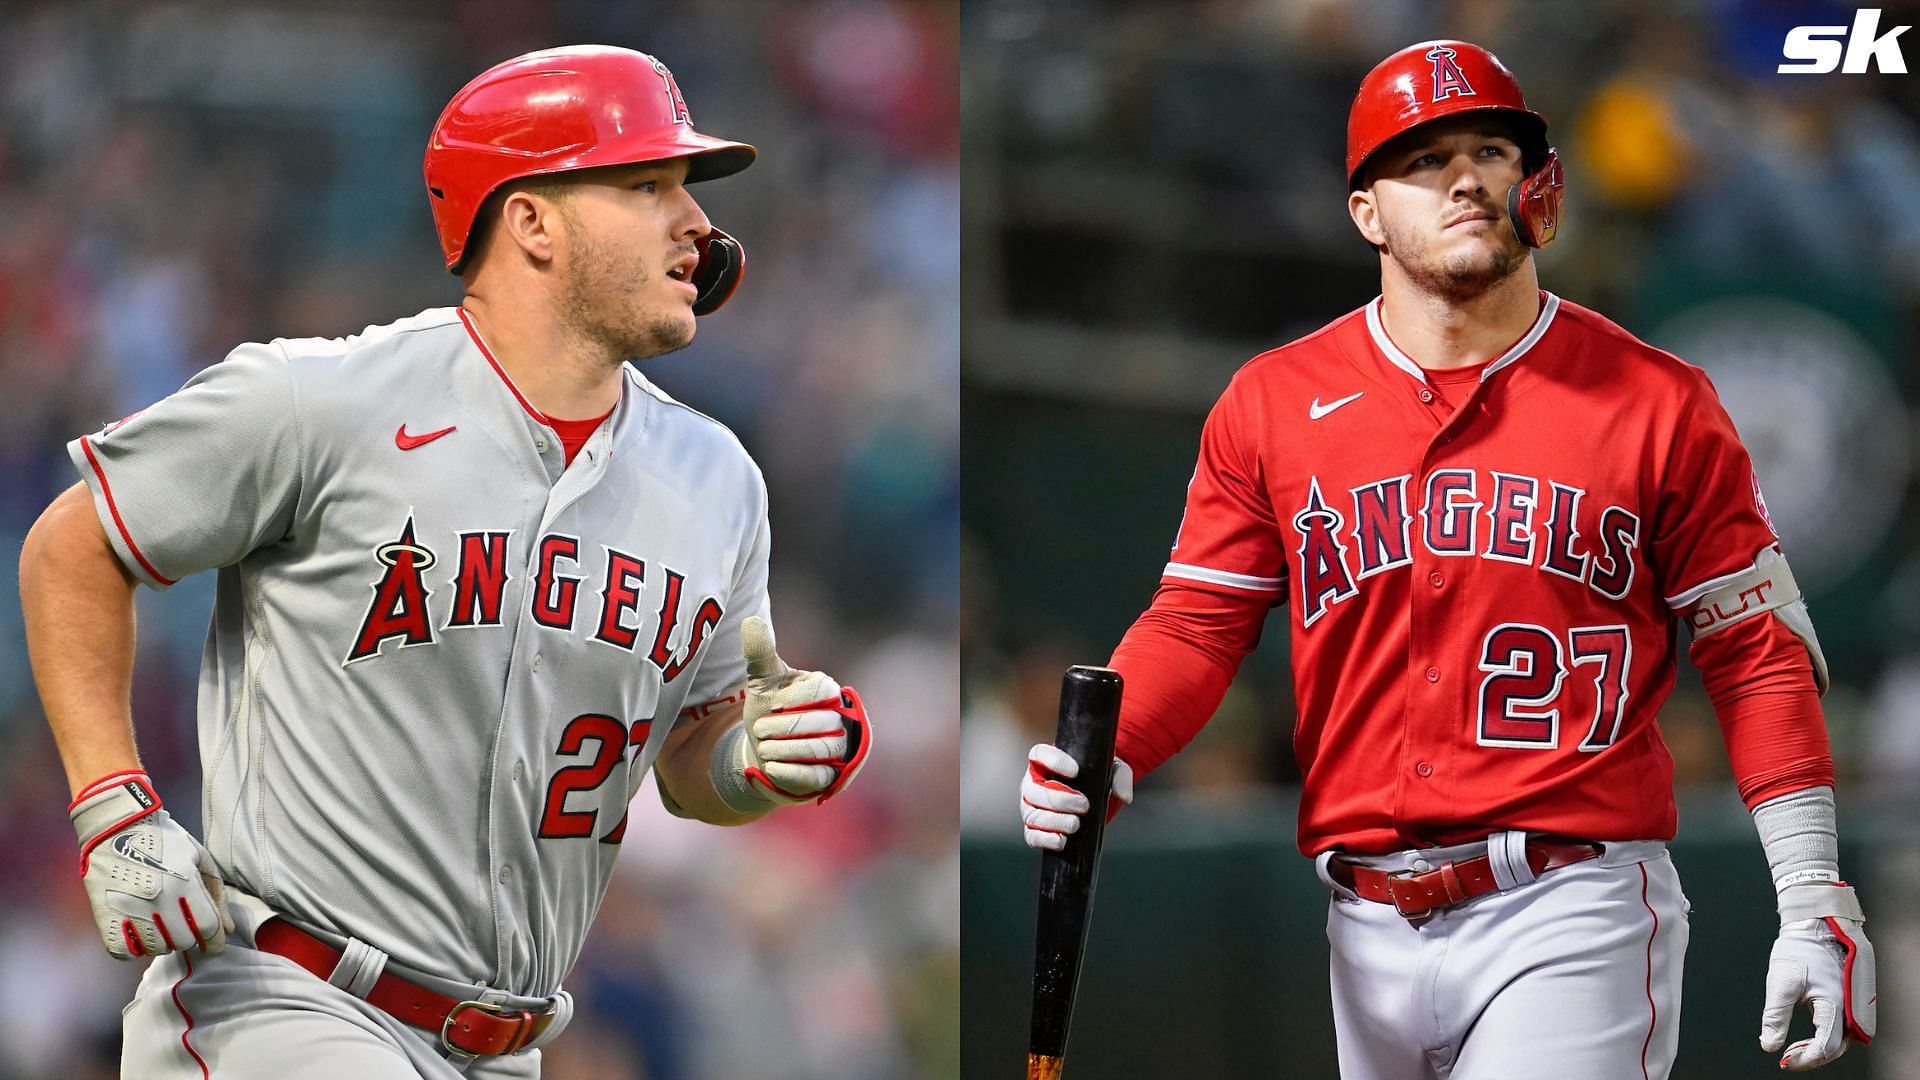 GOATS go back-to-back!! Mike Trout and Shohei Ohtani hit back-to-back  homers! 